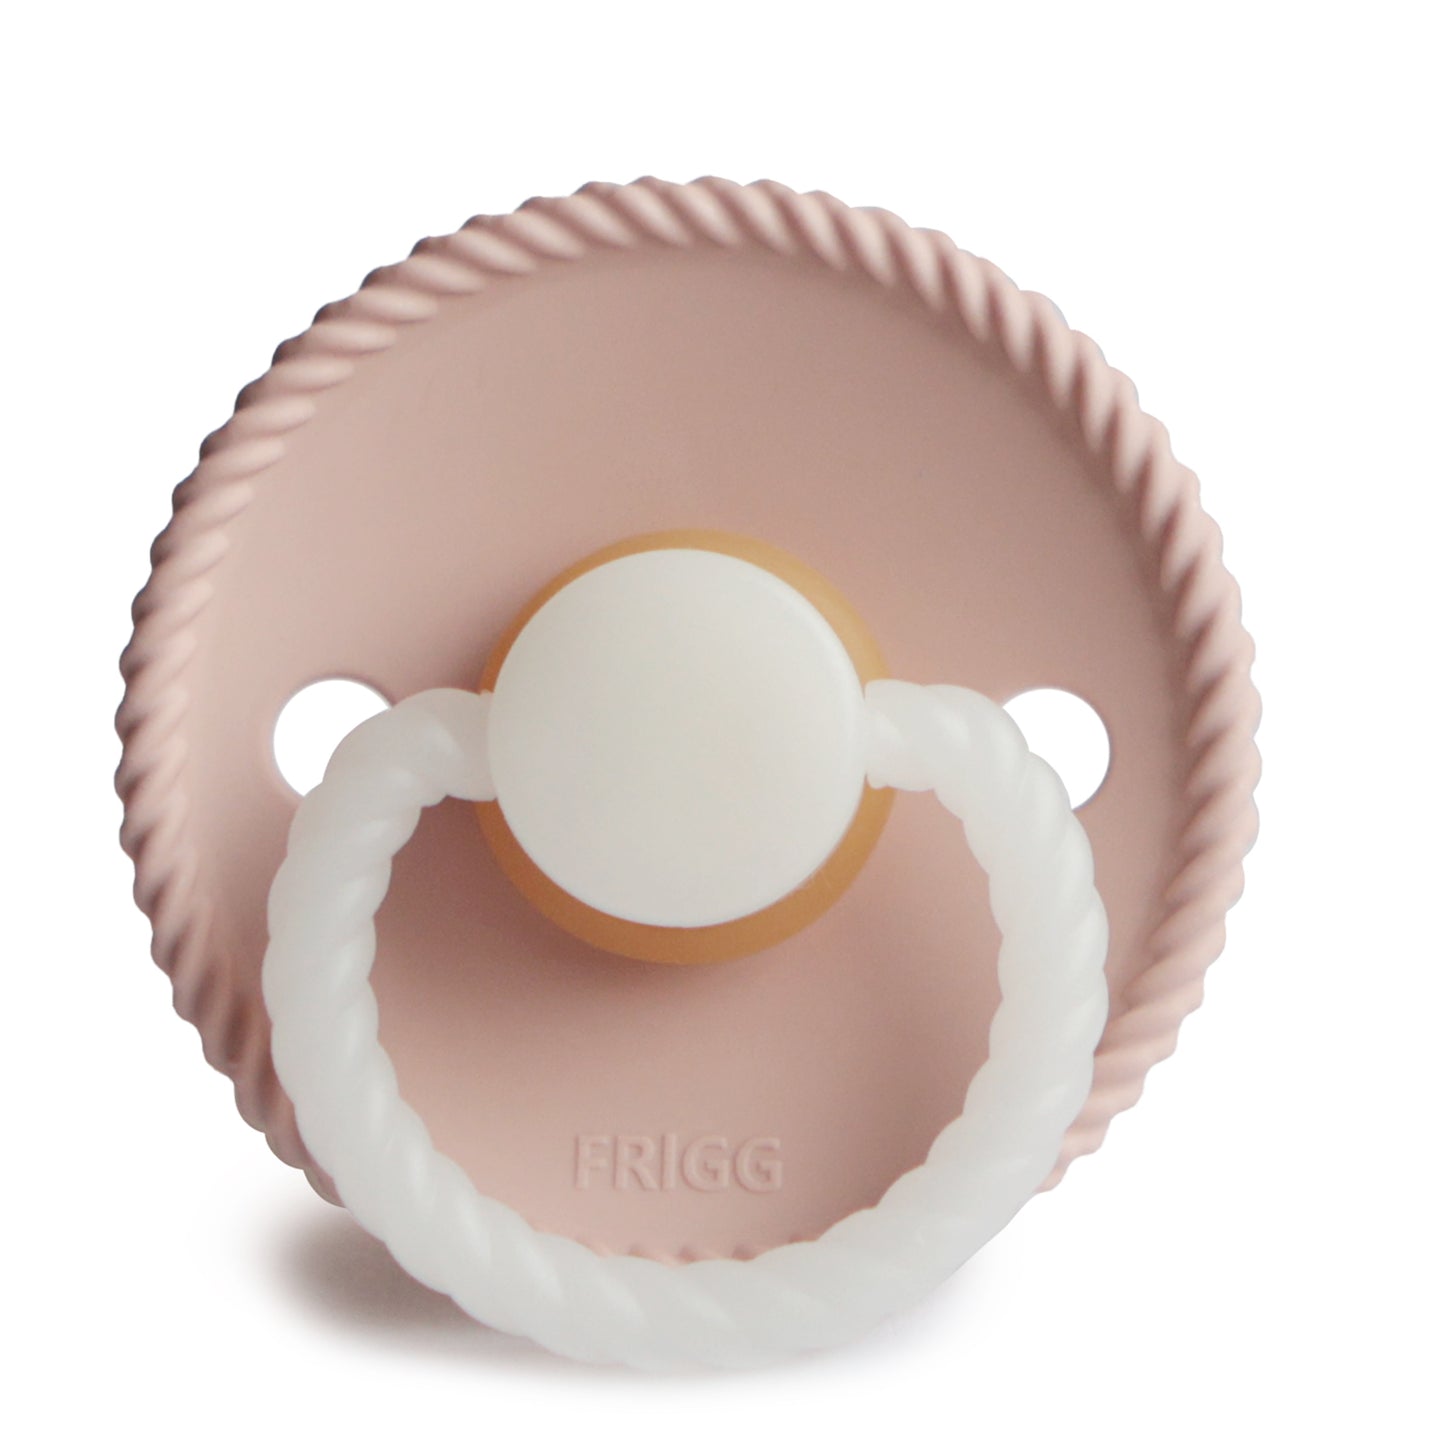 Frigg pacifier Silicone - FRIGG Rope and Rope Night - Size 2